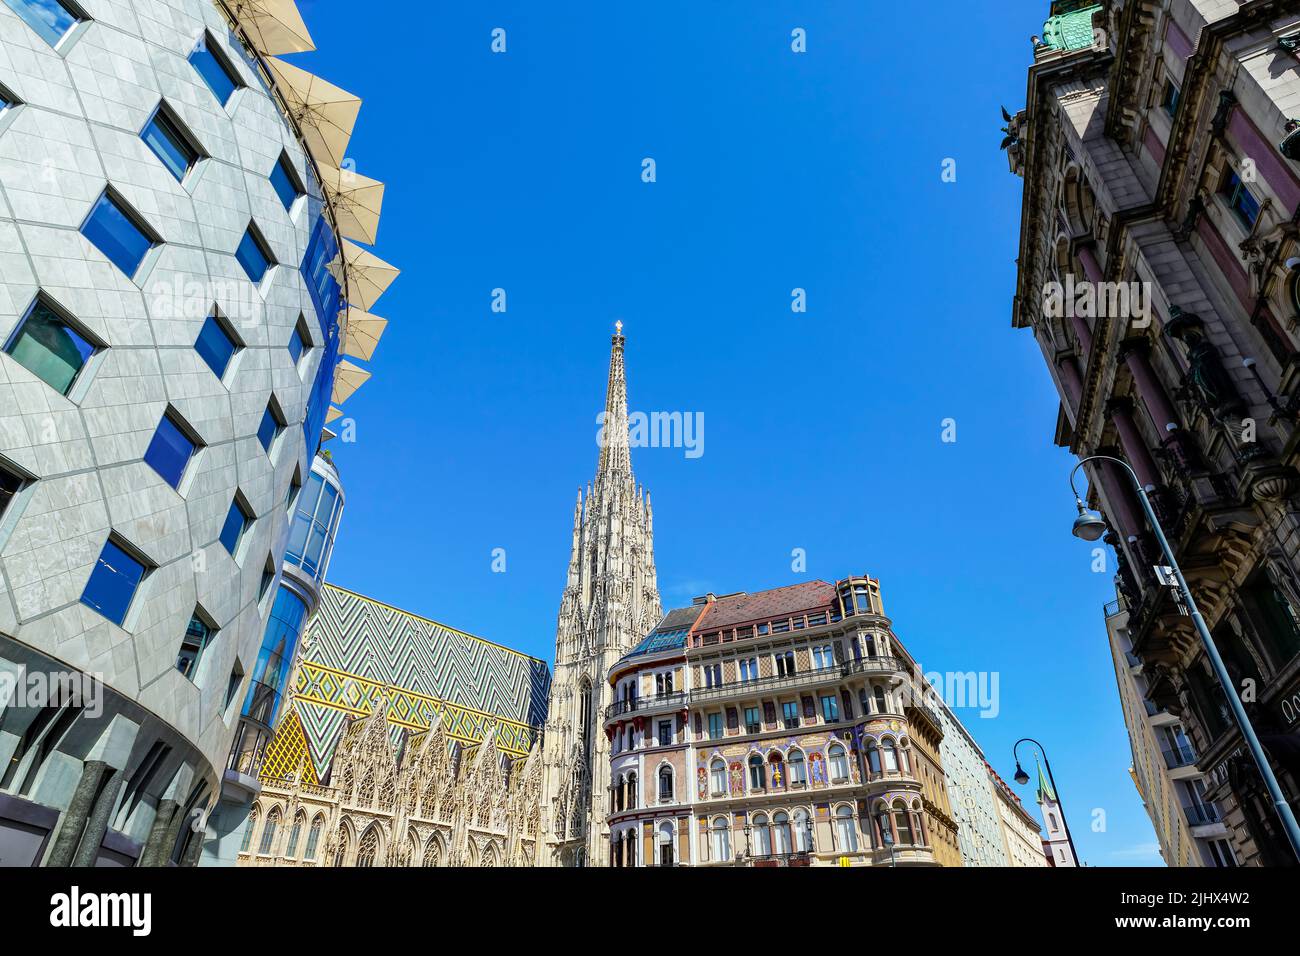 View of  St. Stephen's Cathedral in Vienna, Austria. The Cathedral is the mother church of the Roman Catholic Archdiocese of Vienna and the seat of th Stock Photo